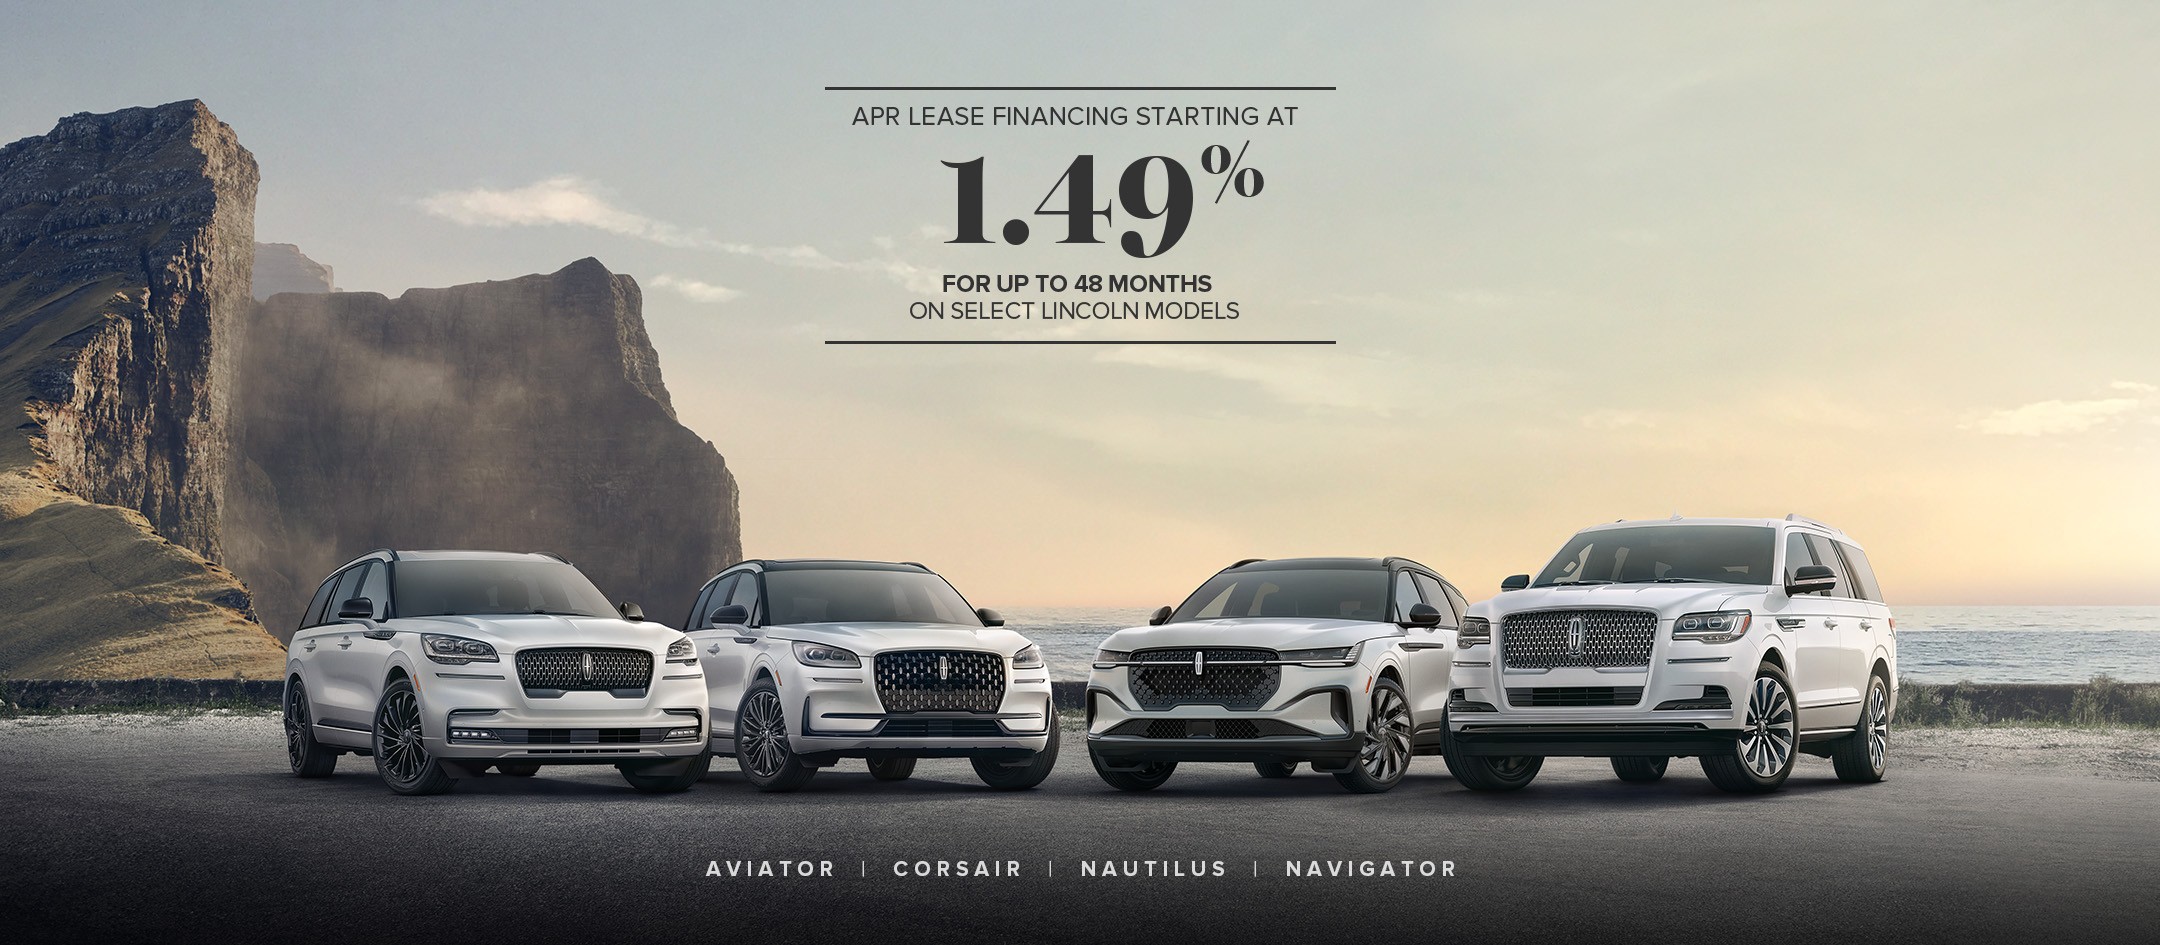 APR Lease financing at 1.49% for up to 48 months on select Lincoln models. The 2024 Lincoln Aviator, Corsair, Nautilus, and Navigator models ligned up and parked on the beach coast.